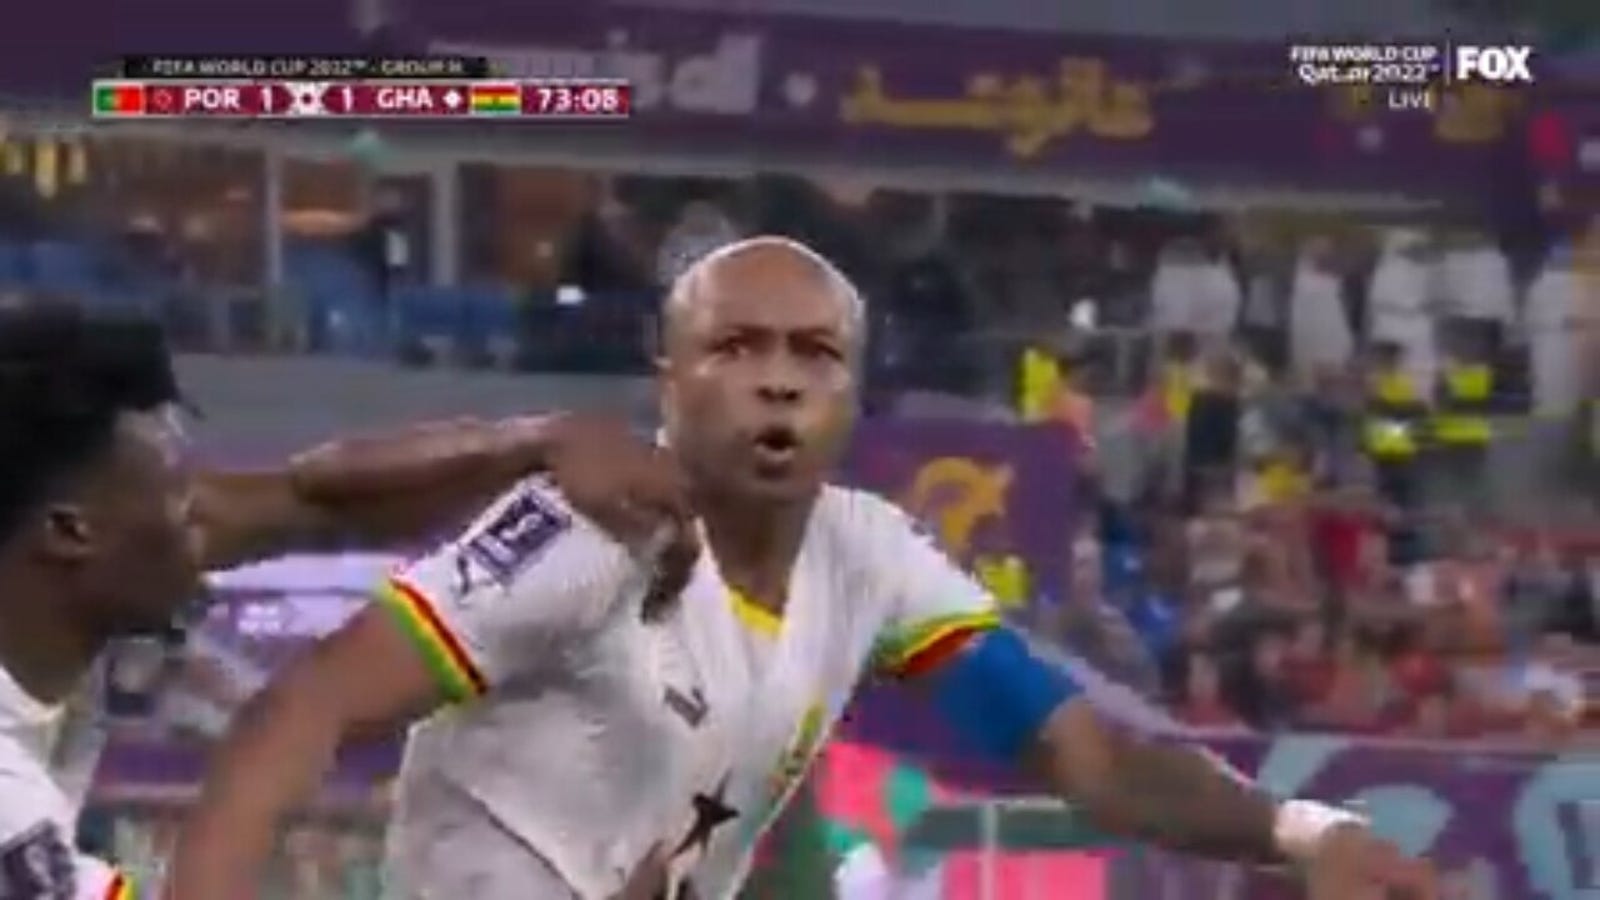 Ghana's Andre Ayew scores against Portugal in the 73'